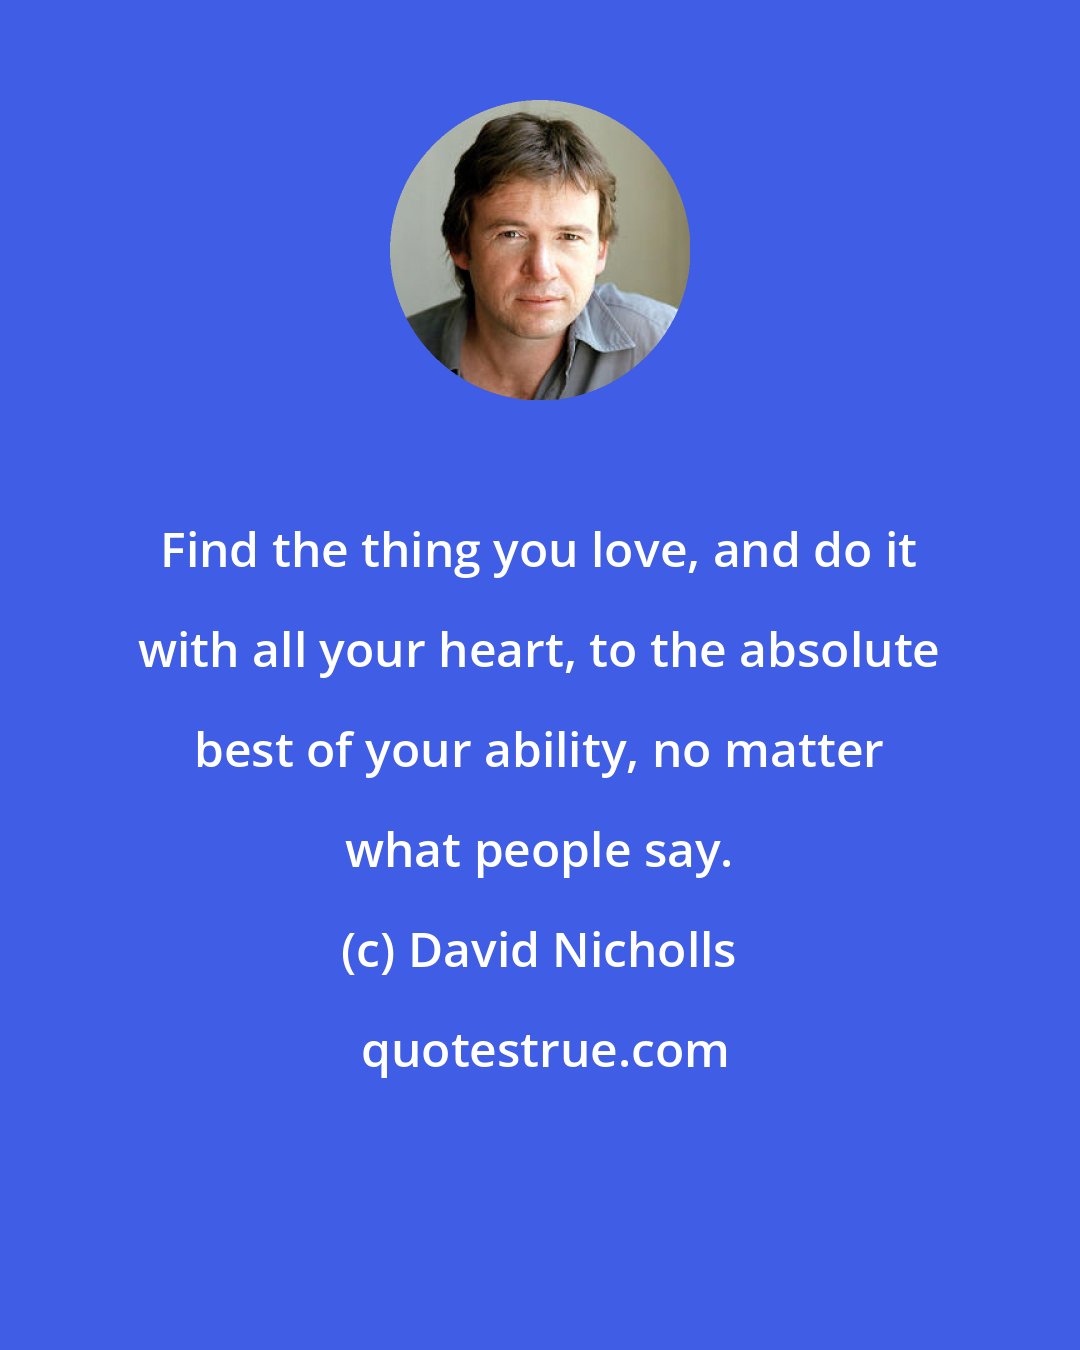 David Nicholls: Find the thing you love, and do it with all your heart, to the absolute best of your ability, no matter what people say.